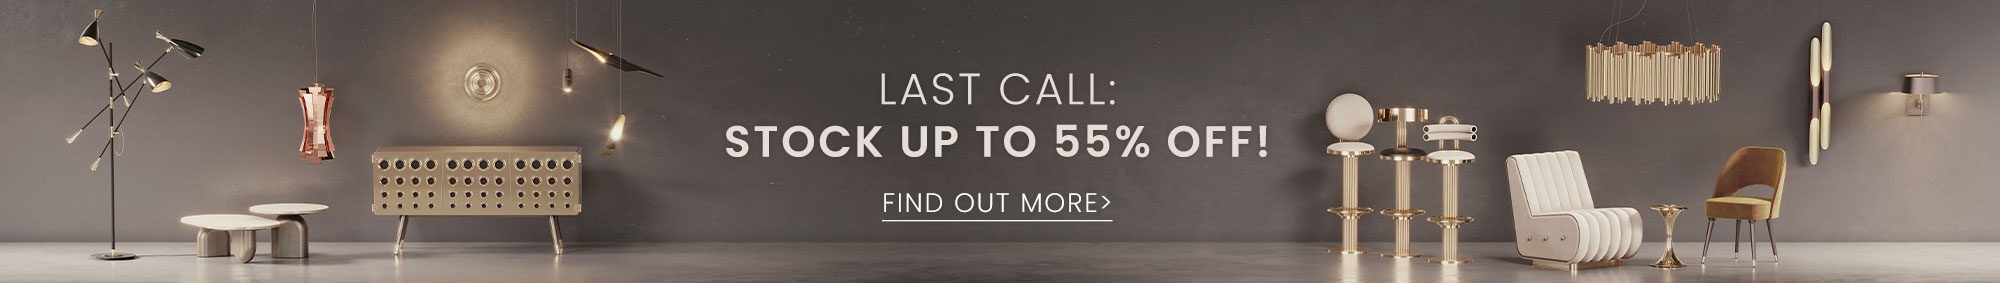 Last Call: Stock Up To 55% Off!